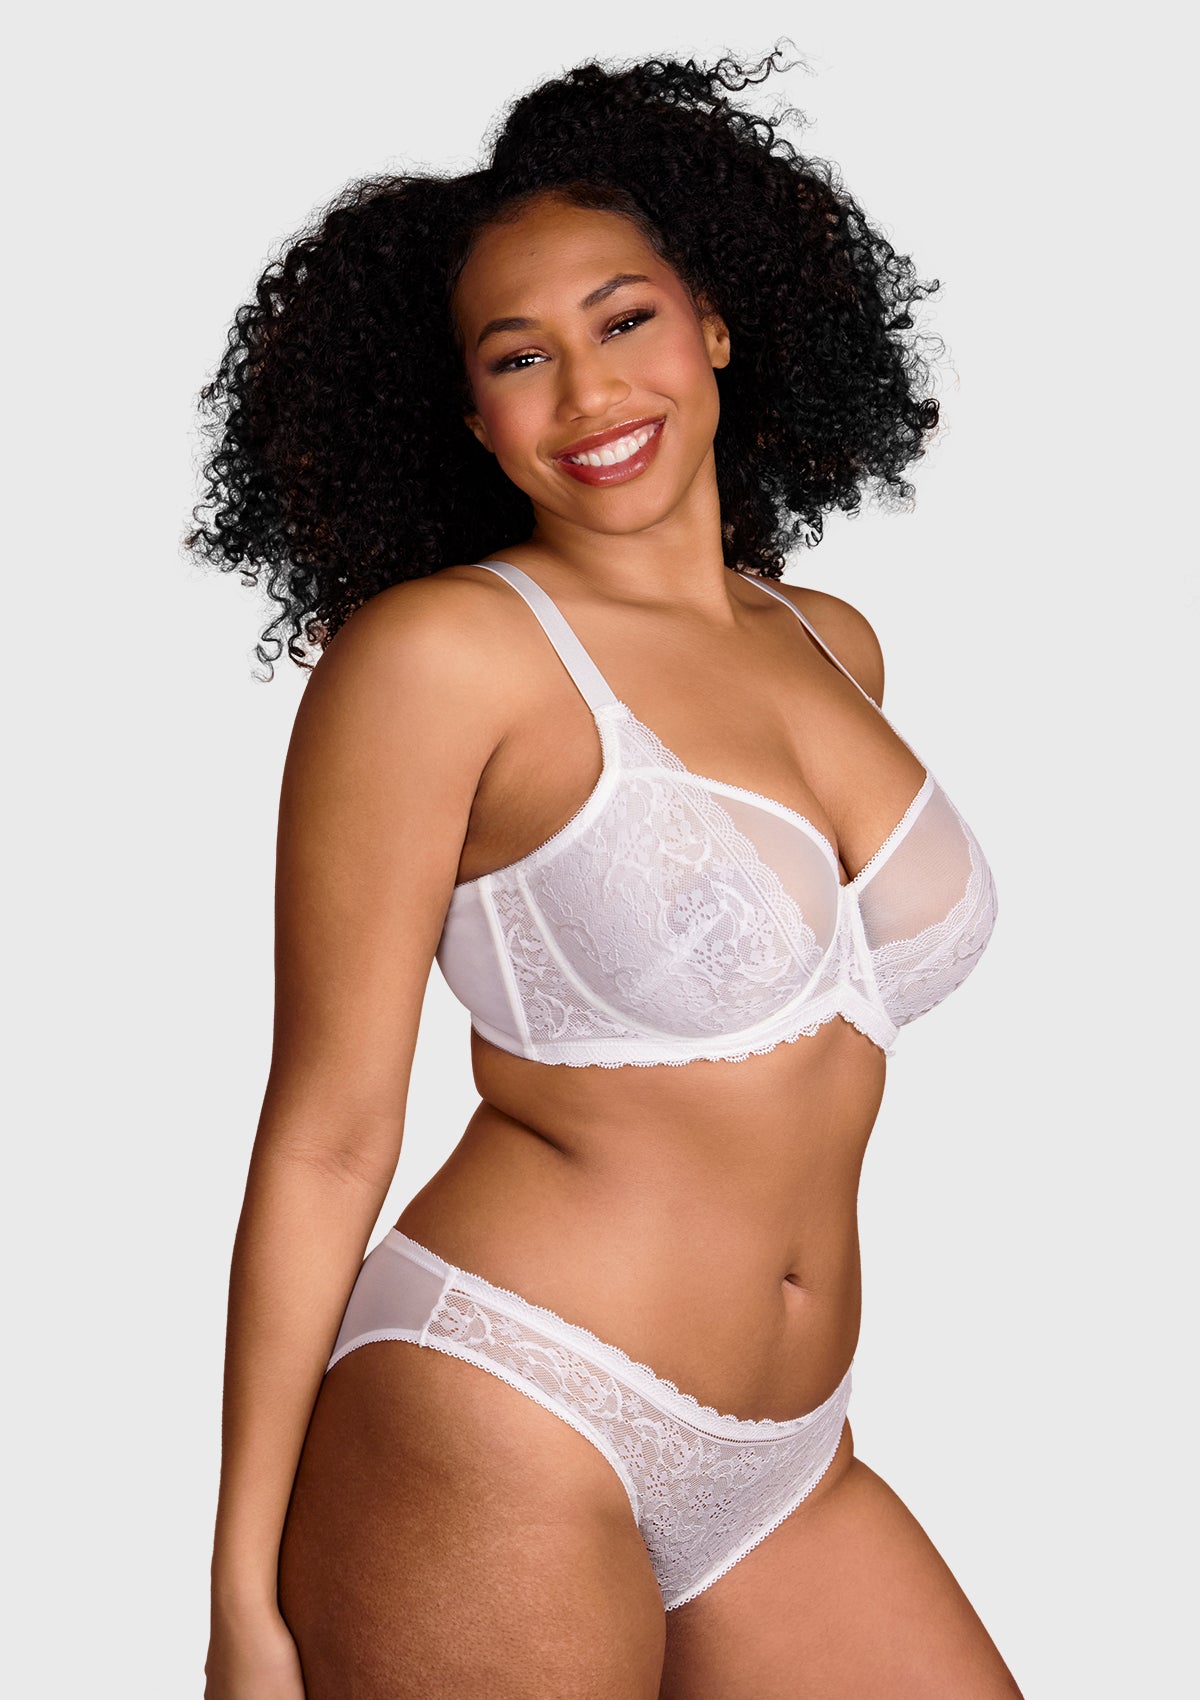 HSIA Anemone Big Bra: Best Bra For Lift And Support, Floral Bra - Light Blue / 36 / DD/E